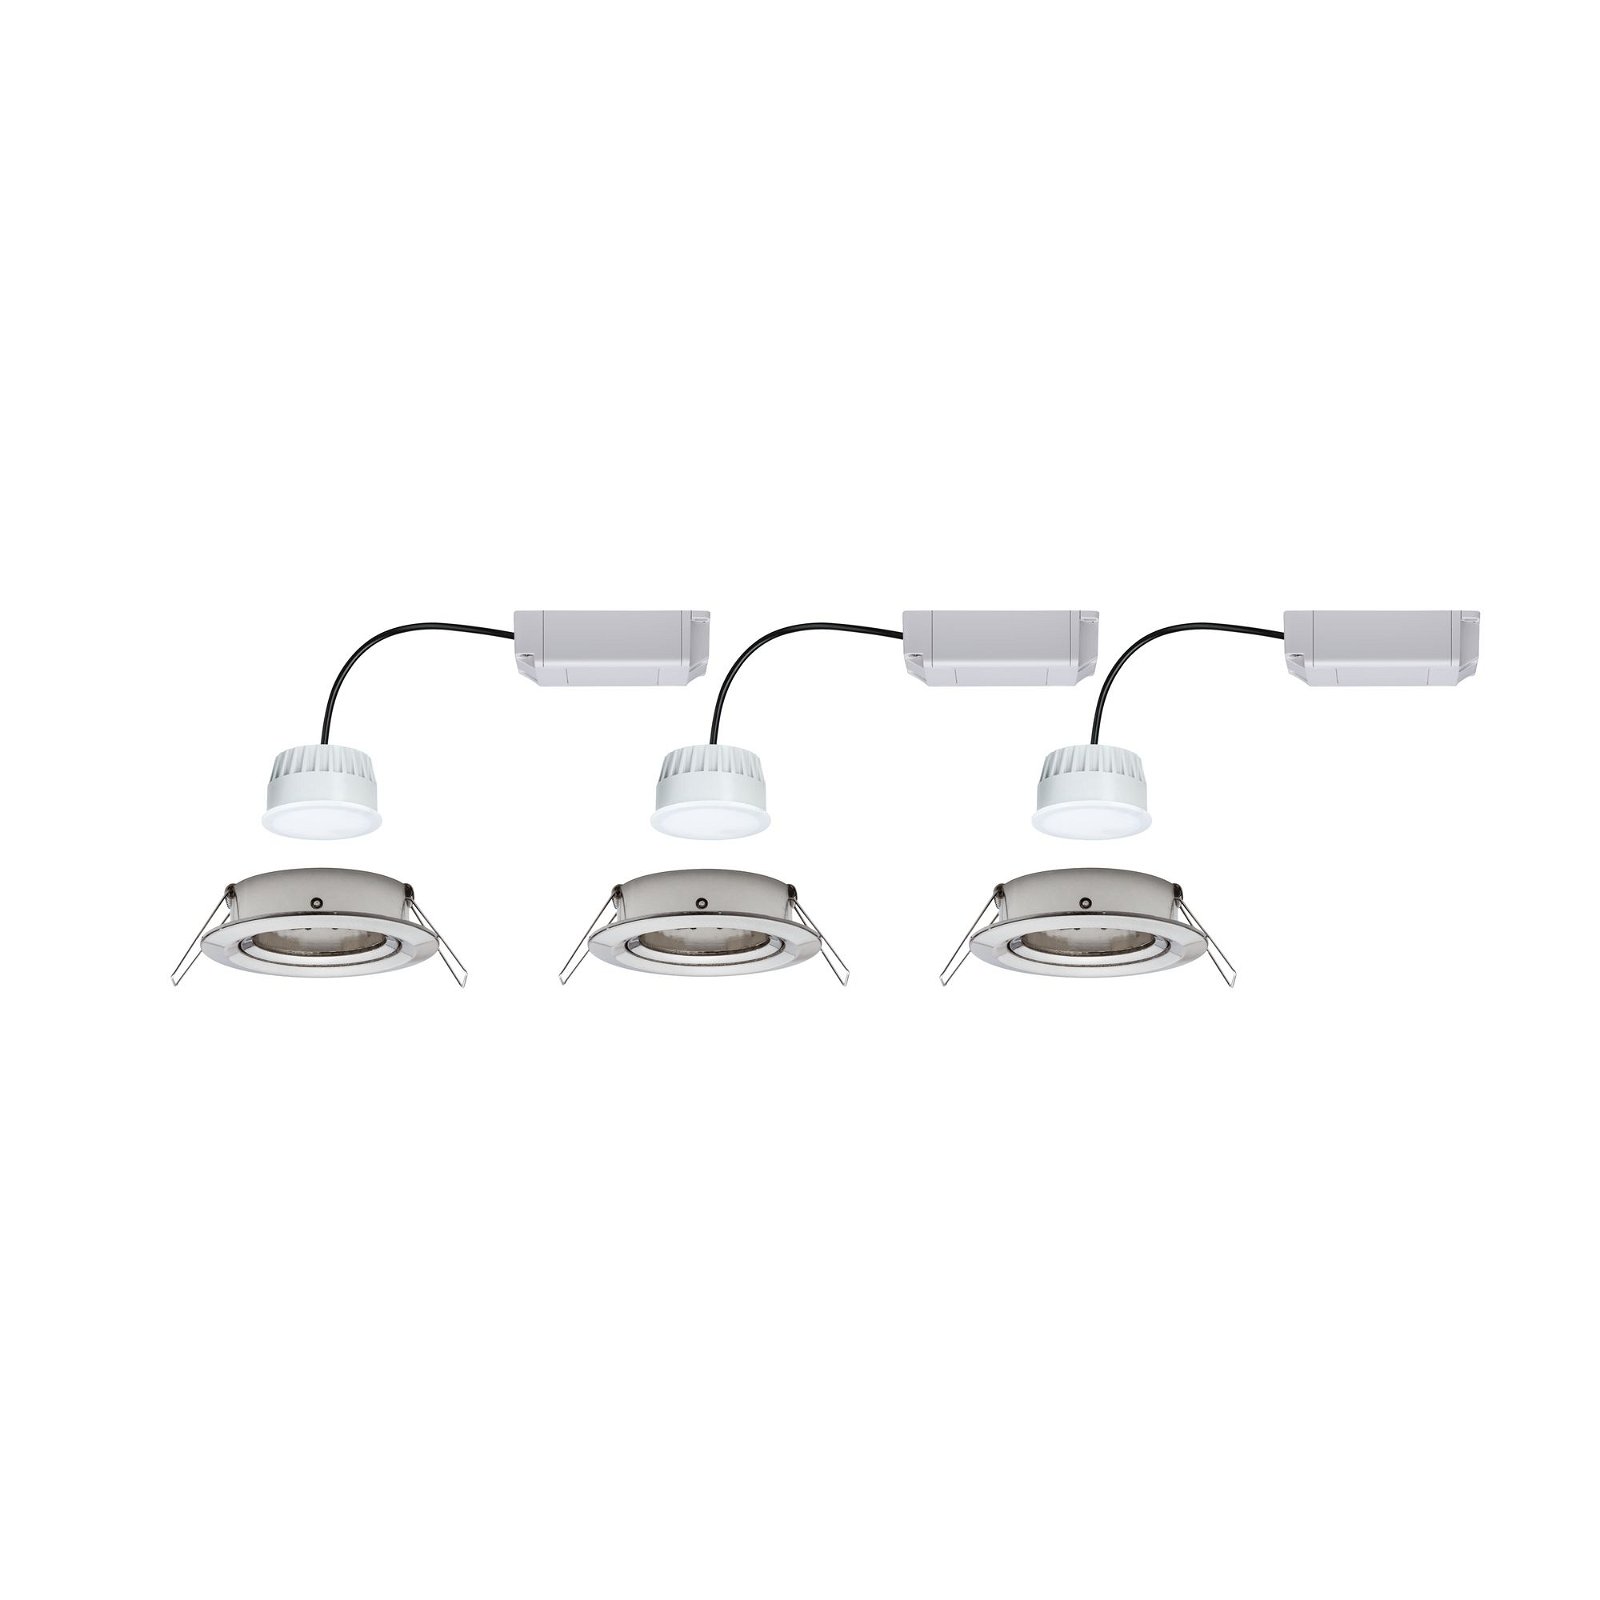 LED Recessed luminaire Smart Home Zigbee Nova Plus Coin Basic Set Swivelling round 84mm 50° Coin 3x5,2W 3x400lm 230V dimmable RGBW Brushed iron